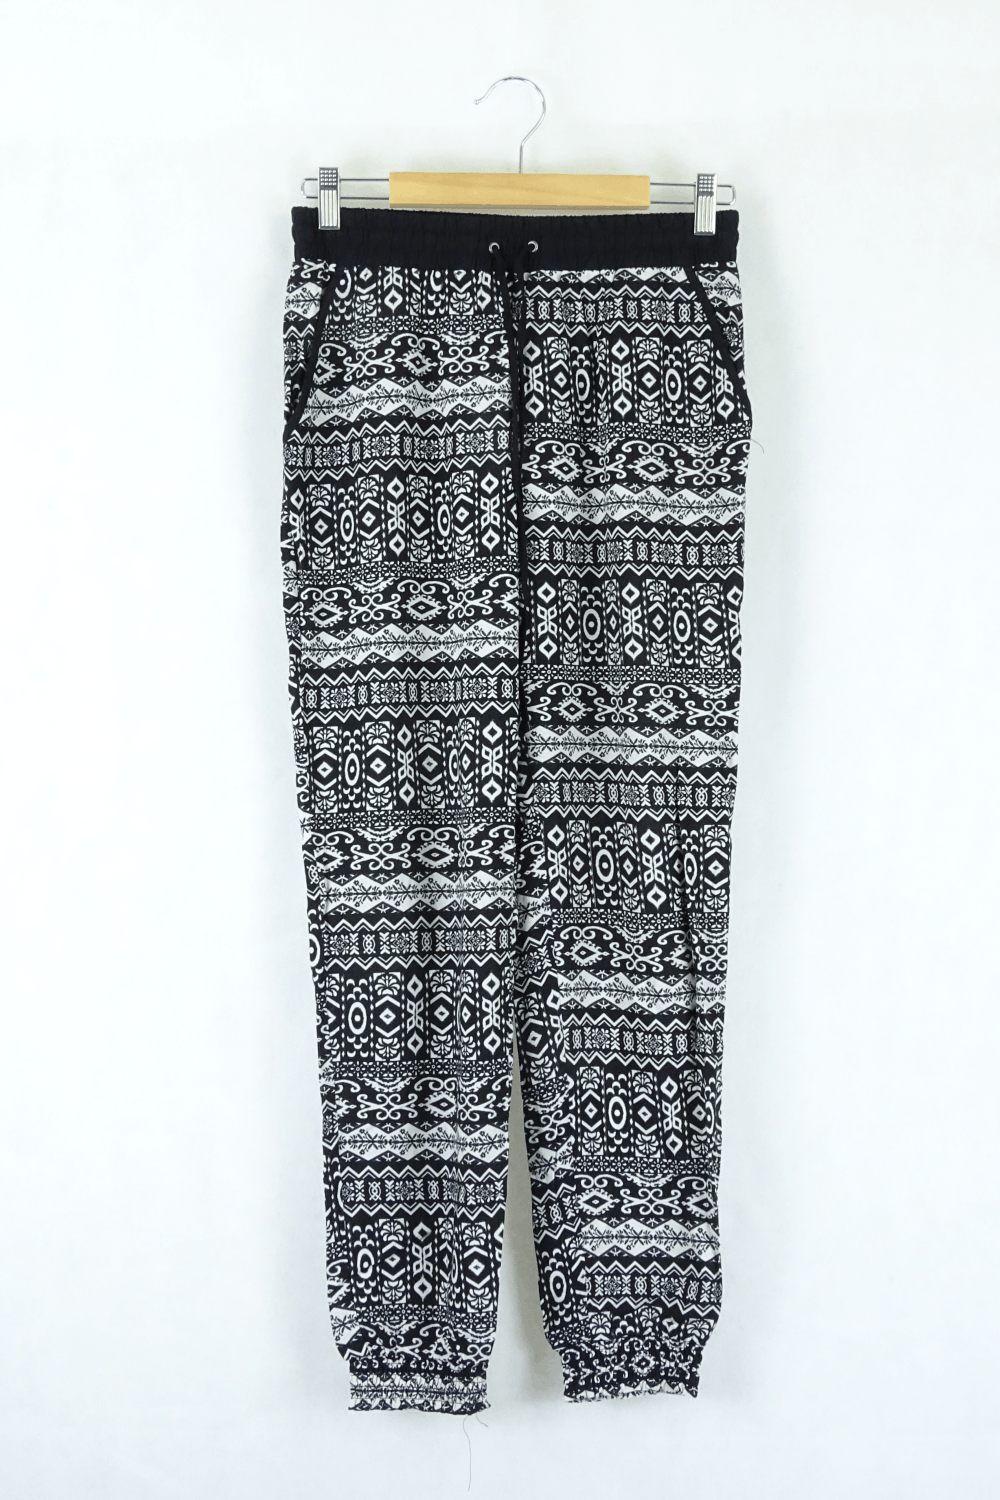 Just Jeans Black and White Printed Pants 8